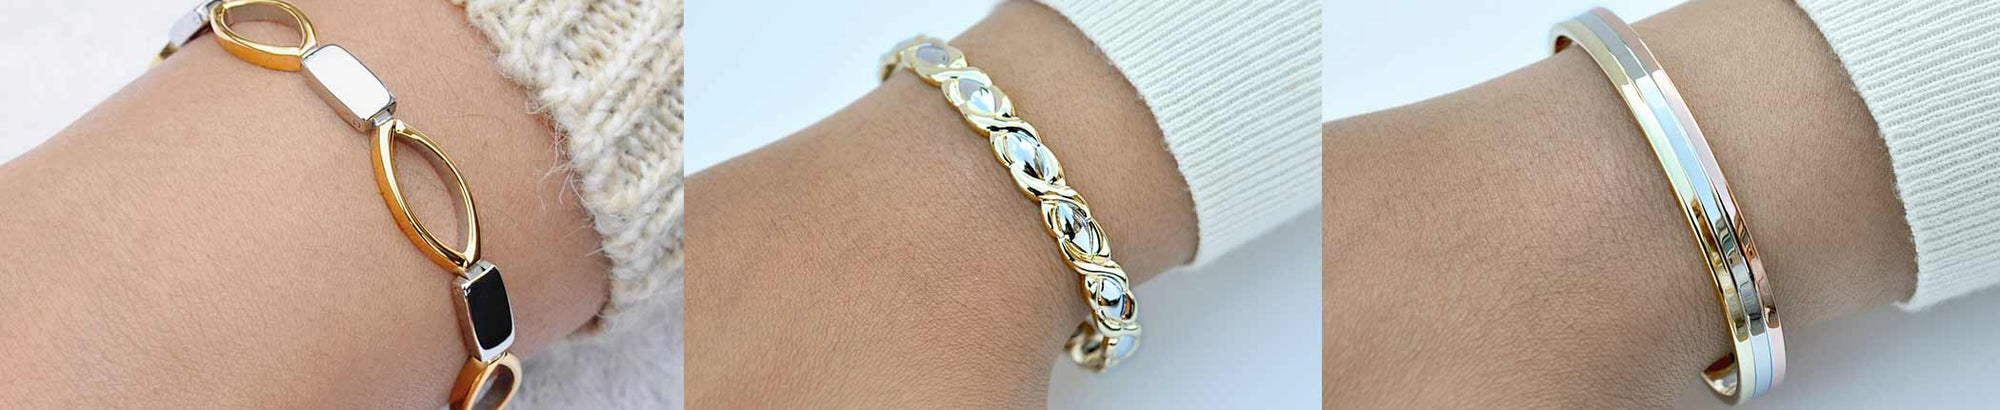 How to wear a ladies’ magnetic bangle